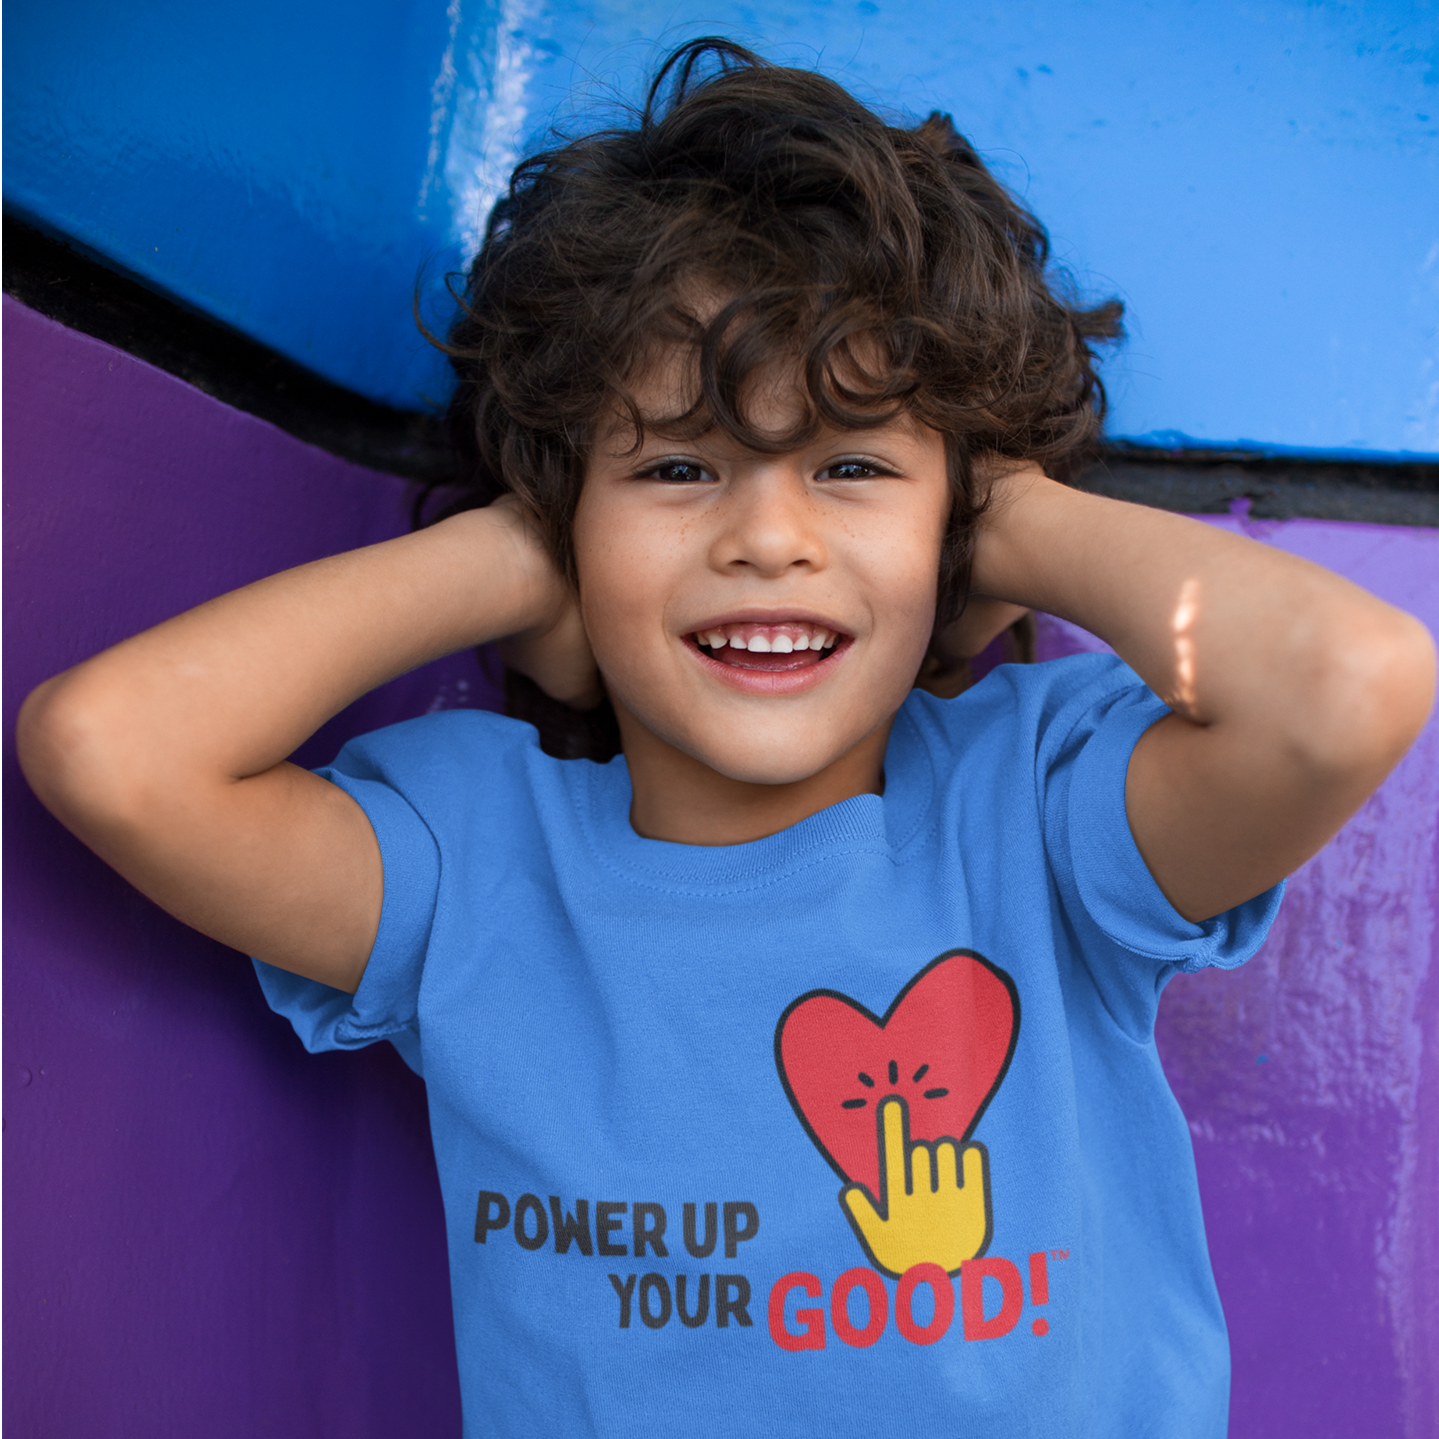 Power Up Your Good Youth T-shirt